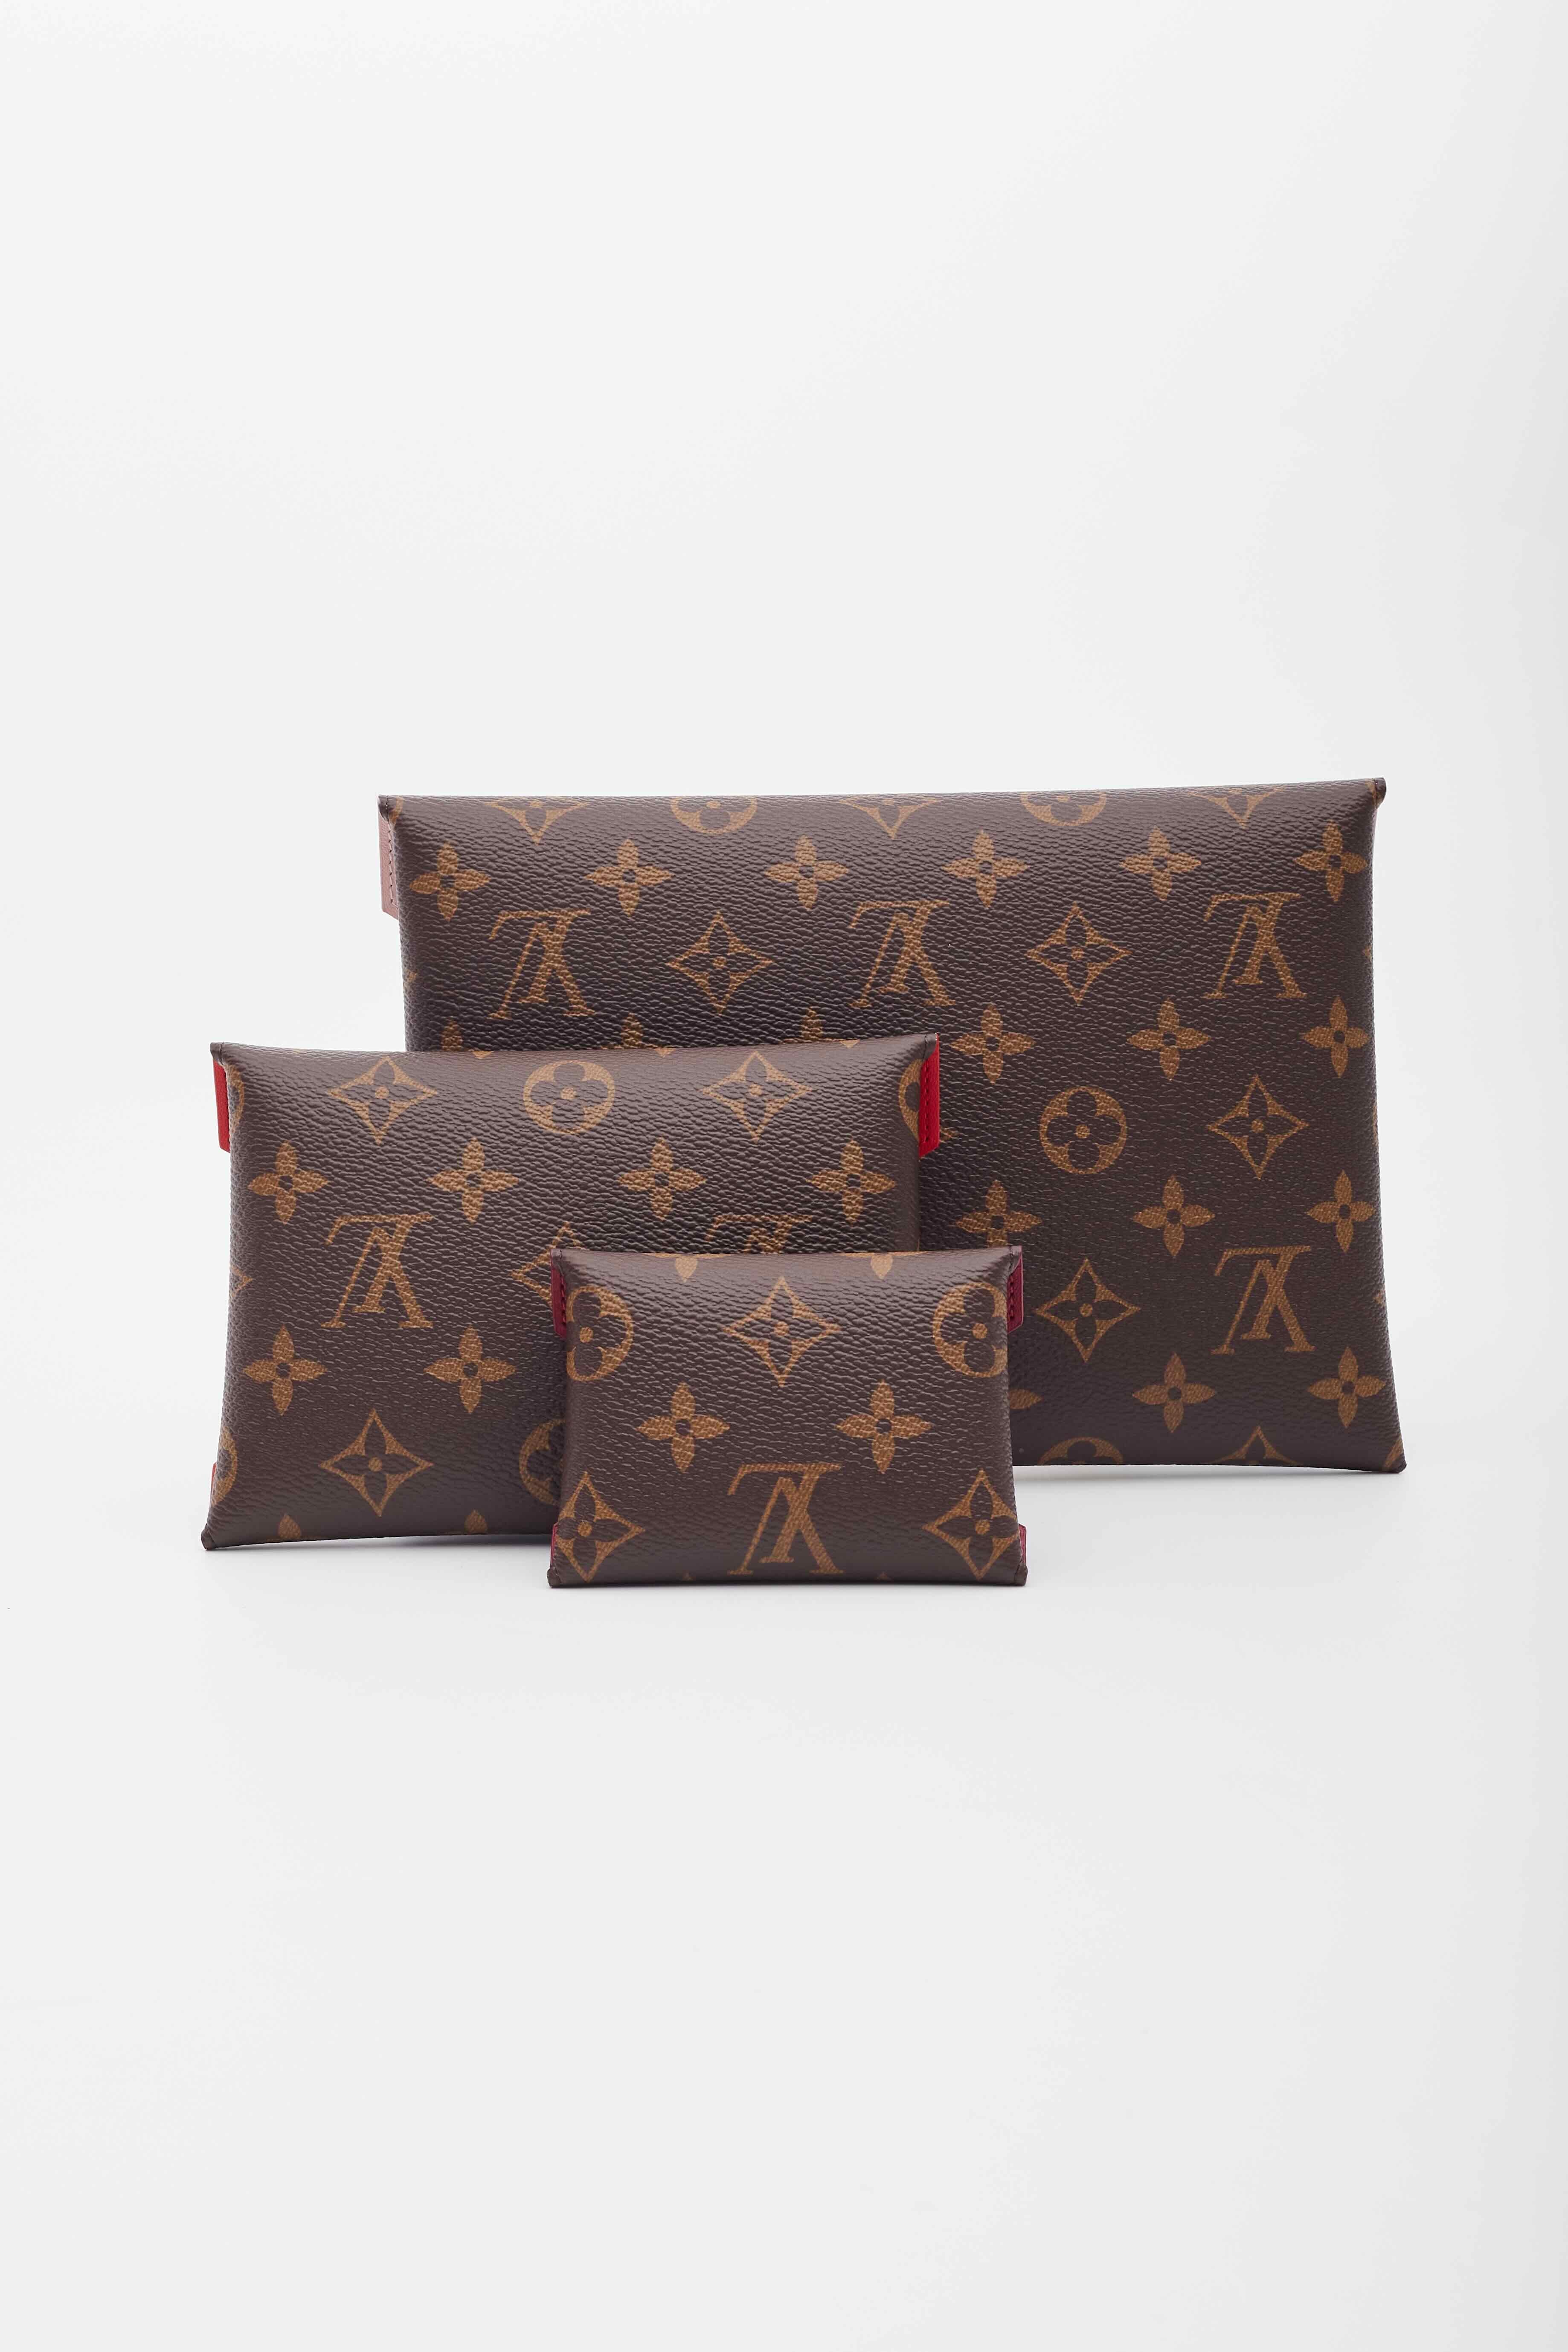 Brown monogram print with coated canvas. 3 envelope flap pouches with button.
Certificate
4 x 3 inch
6 x 4.5 inch
9 x 6.5 inch

Comes with dust bag and certificate from legit grails.
Condition is pristine. Excellent.

Made in France